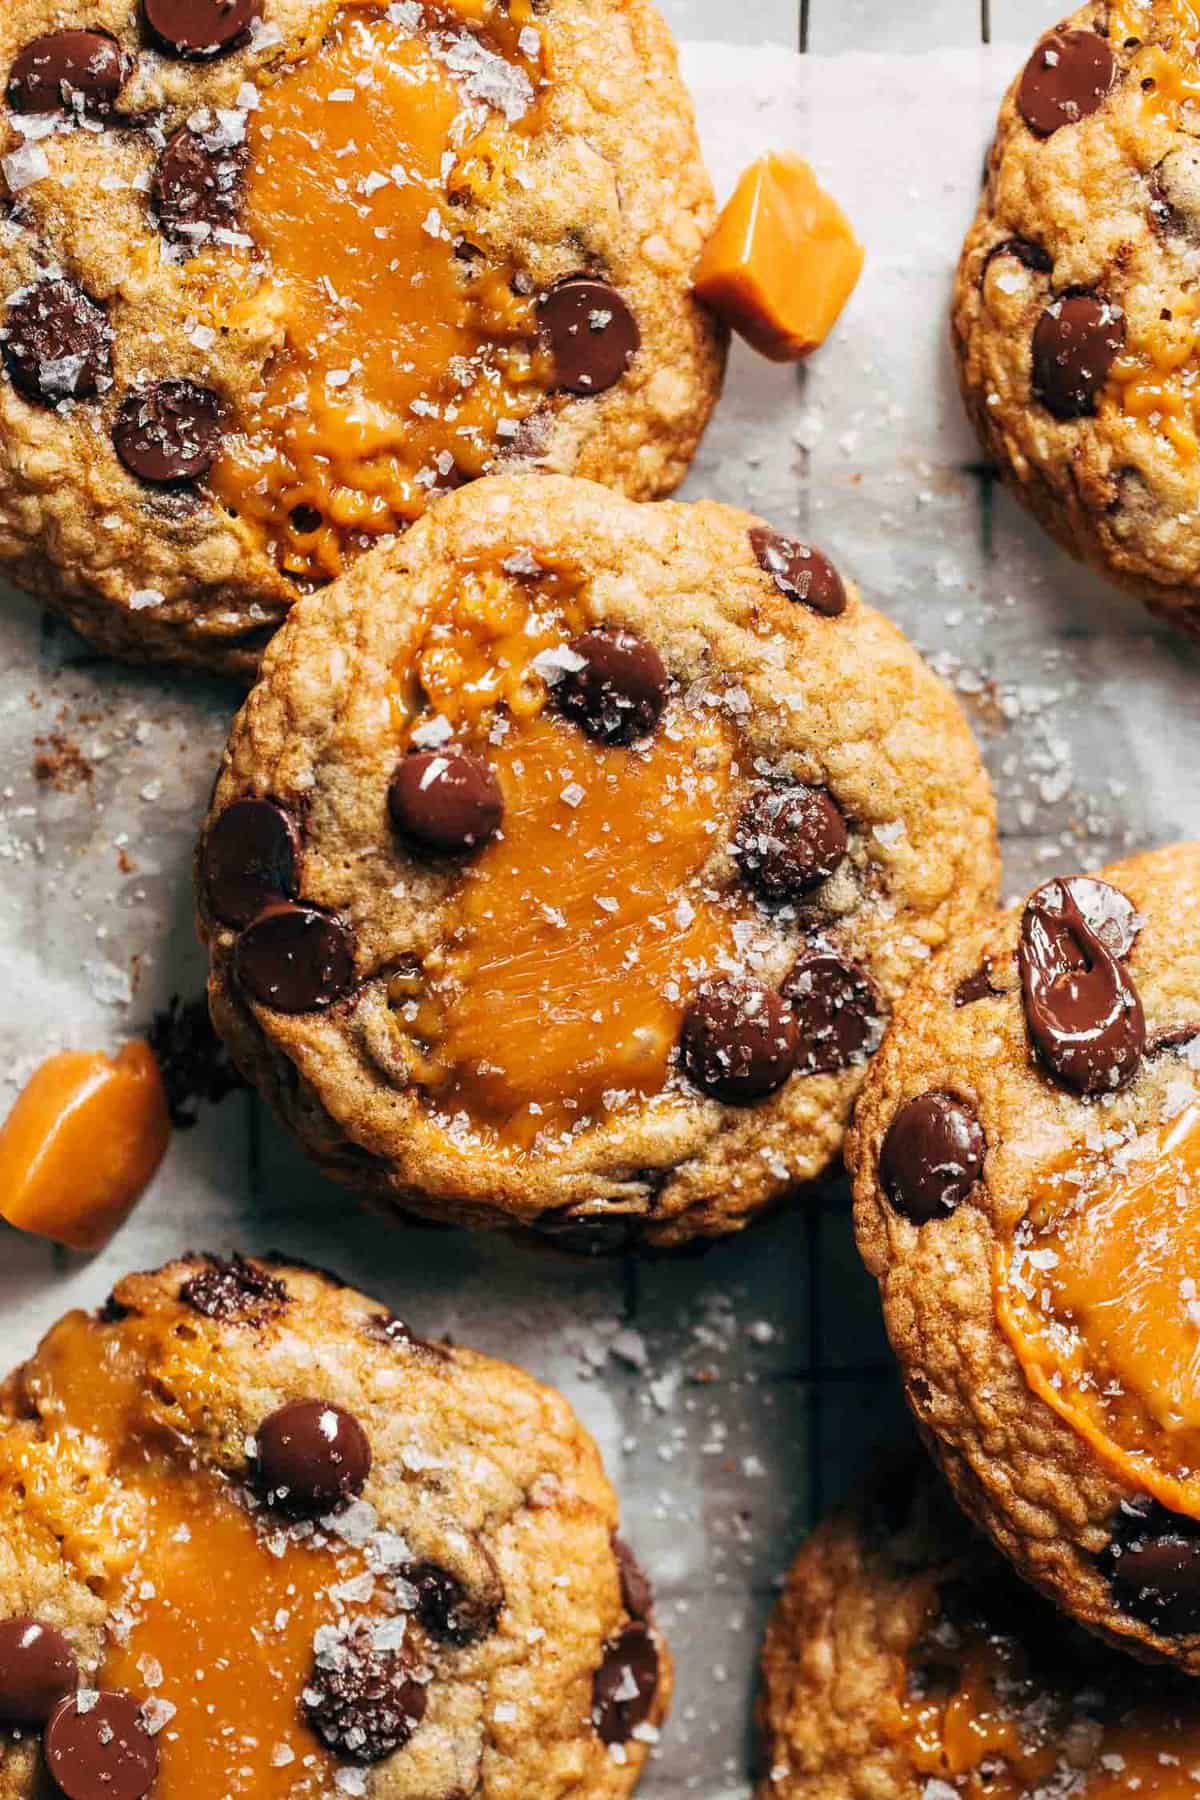 The BEST Salted Caramel Chocolate Chip Cookies!